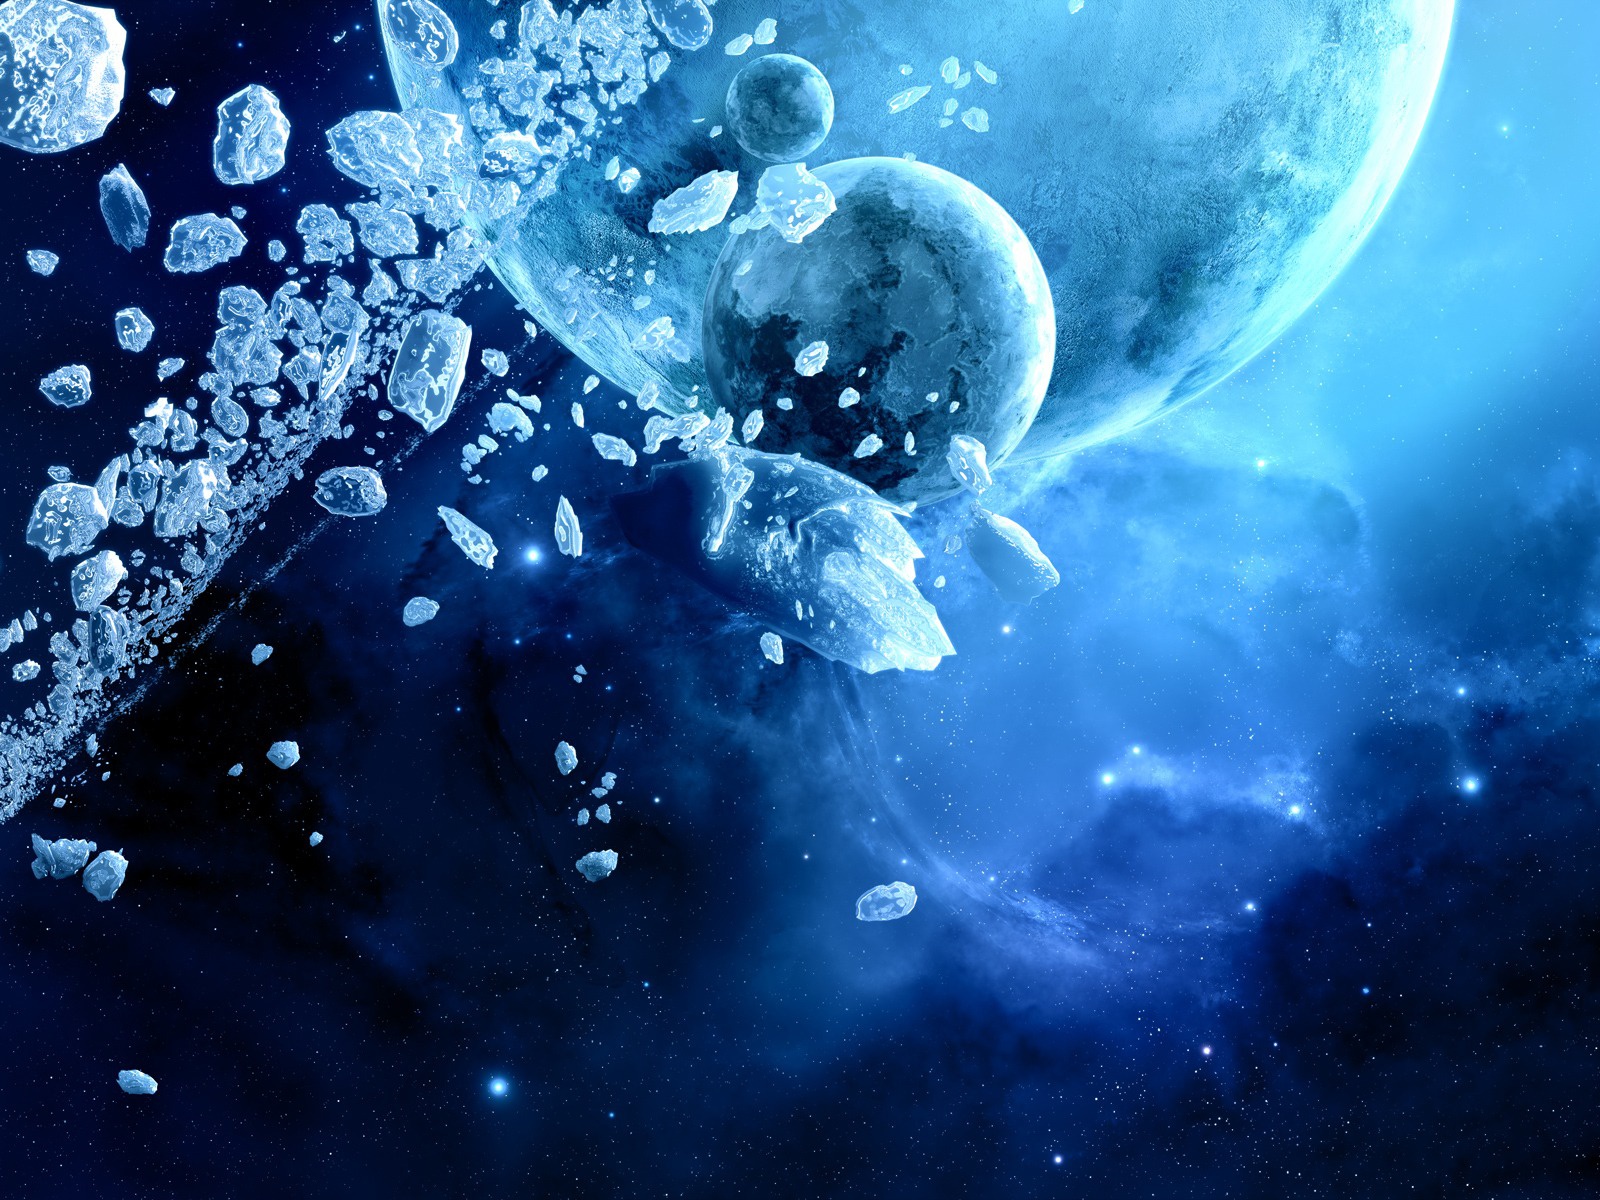 Wallpapers space ice planets on the desktop